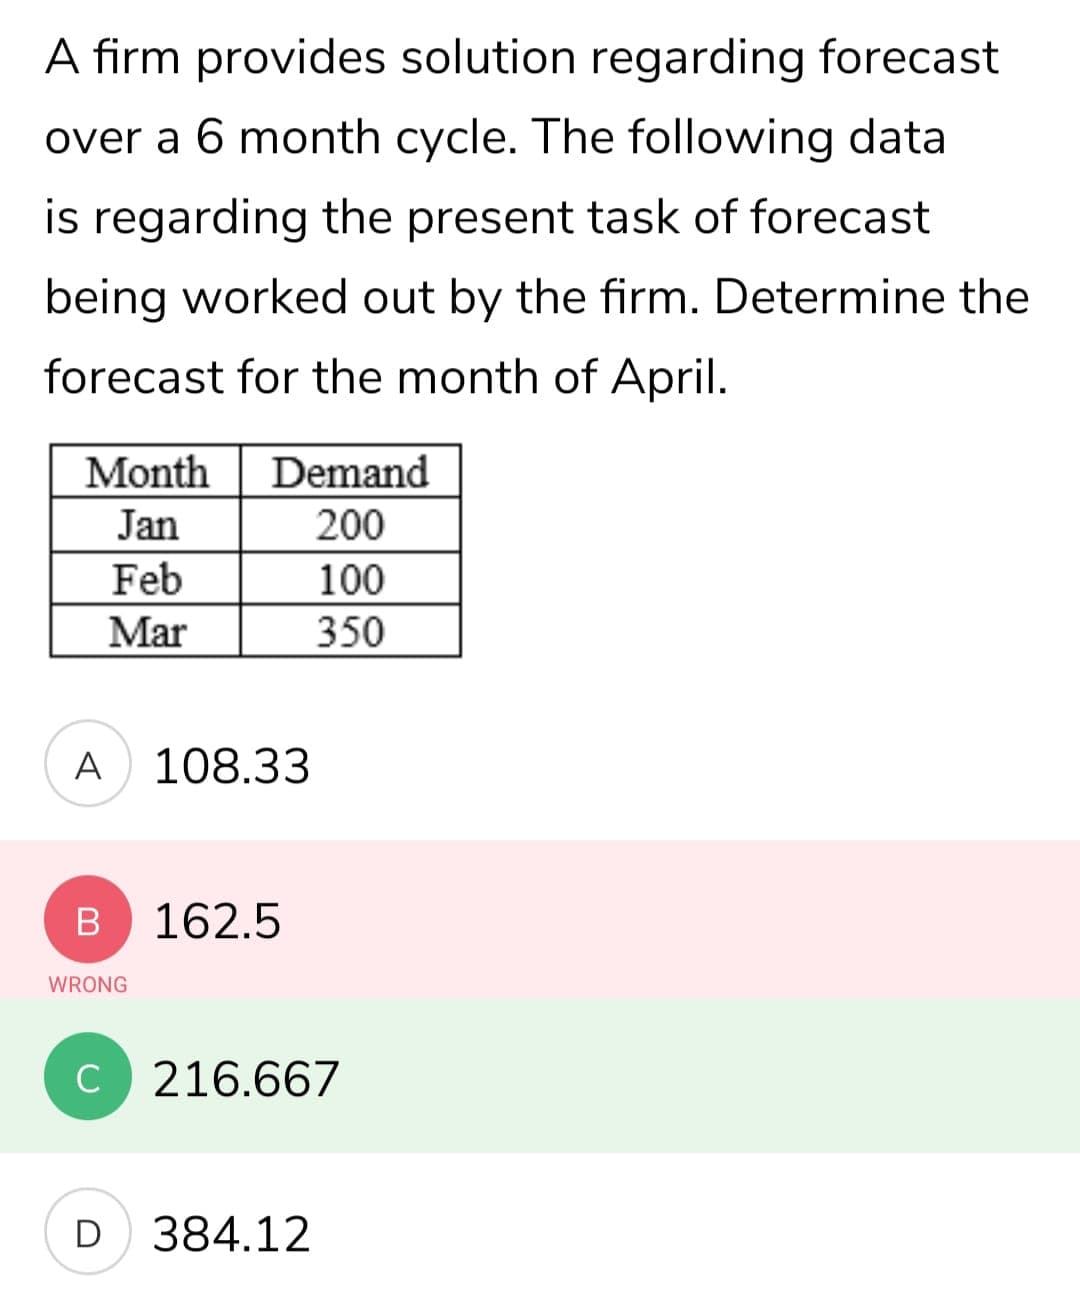 A firm provides solution regarding forecast
over a 6 month cycle. The following data
is regarding the present task of forecast
being worked out by the firm. Determine the
forecast for the month of April.
Month
Demand
Jan
200
Feb
100
Mar
350
A
108.33
162.5
WRONG
C
C 216.667
D 384.12
